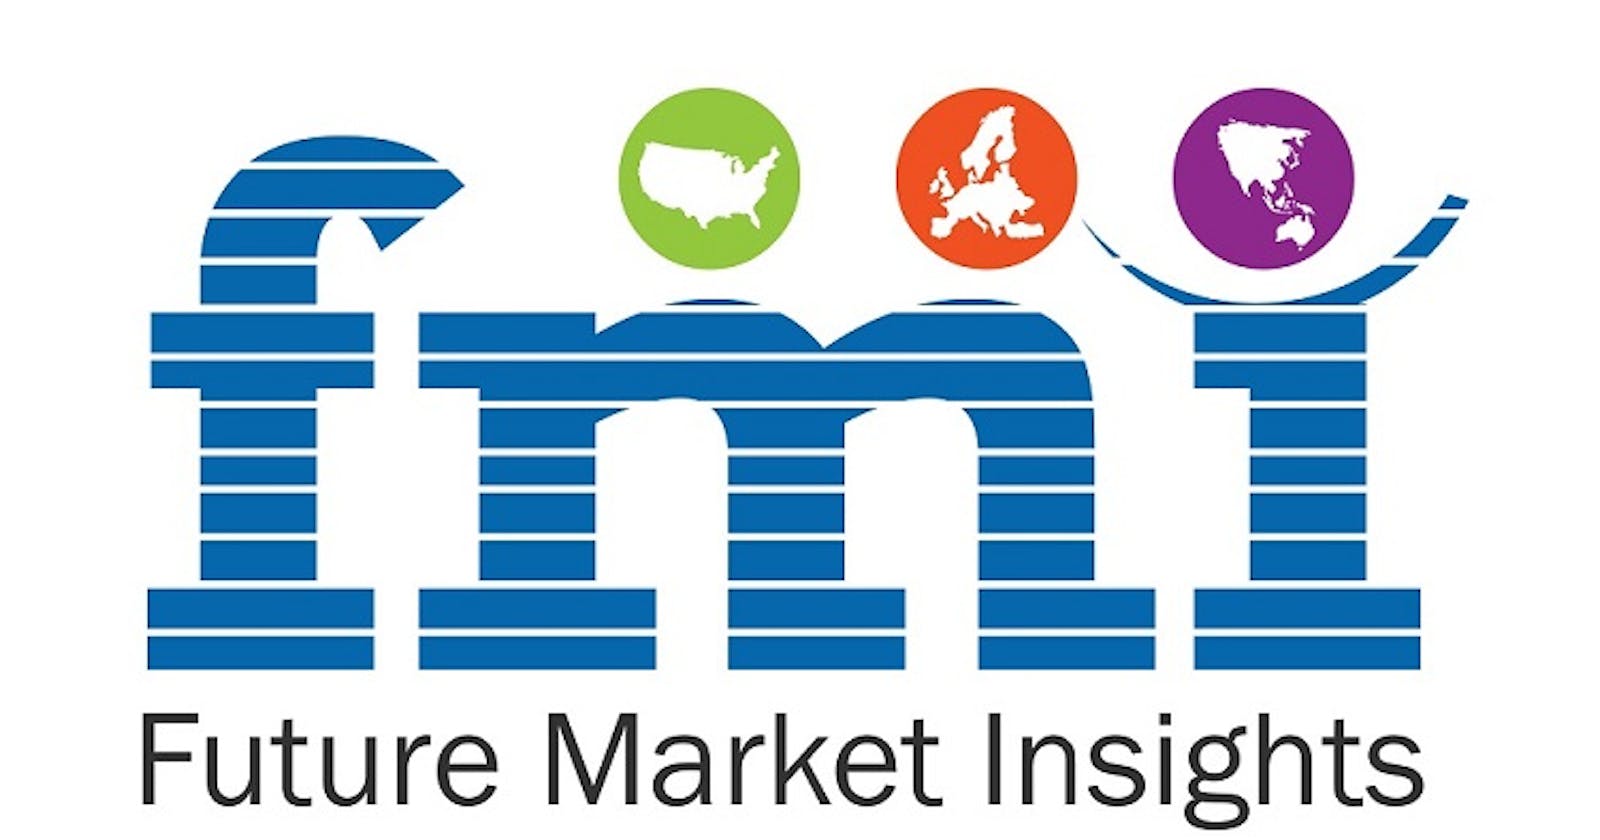 Veterinary Services Market 2022 Analysis, Research, Review, Applications and Forecast to 2032